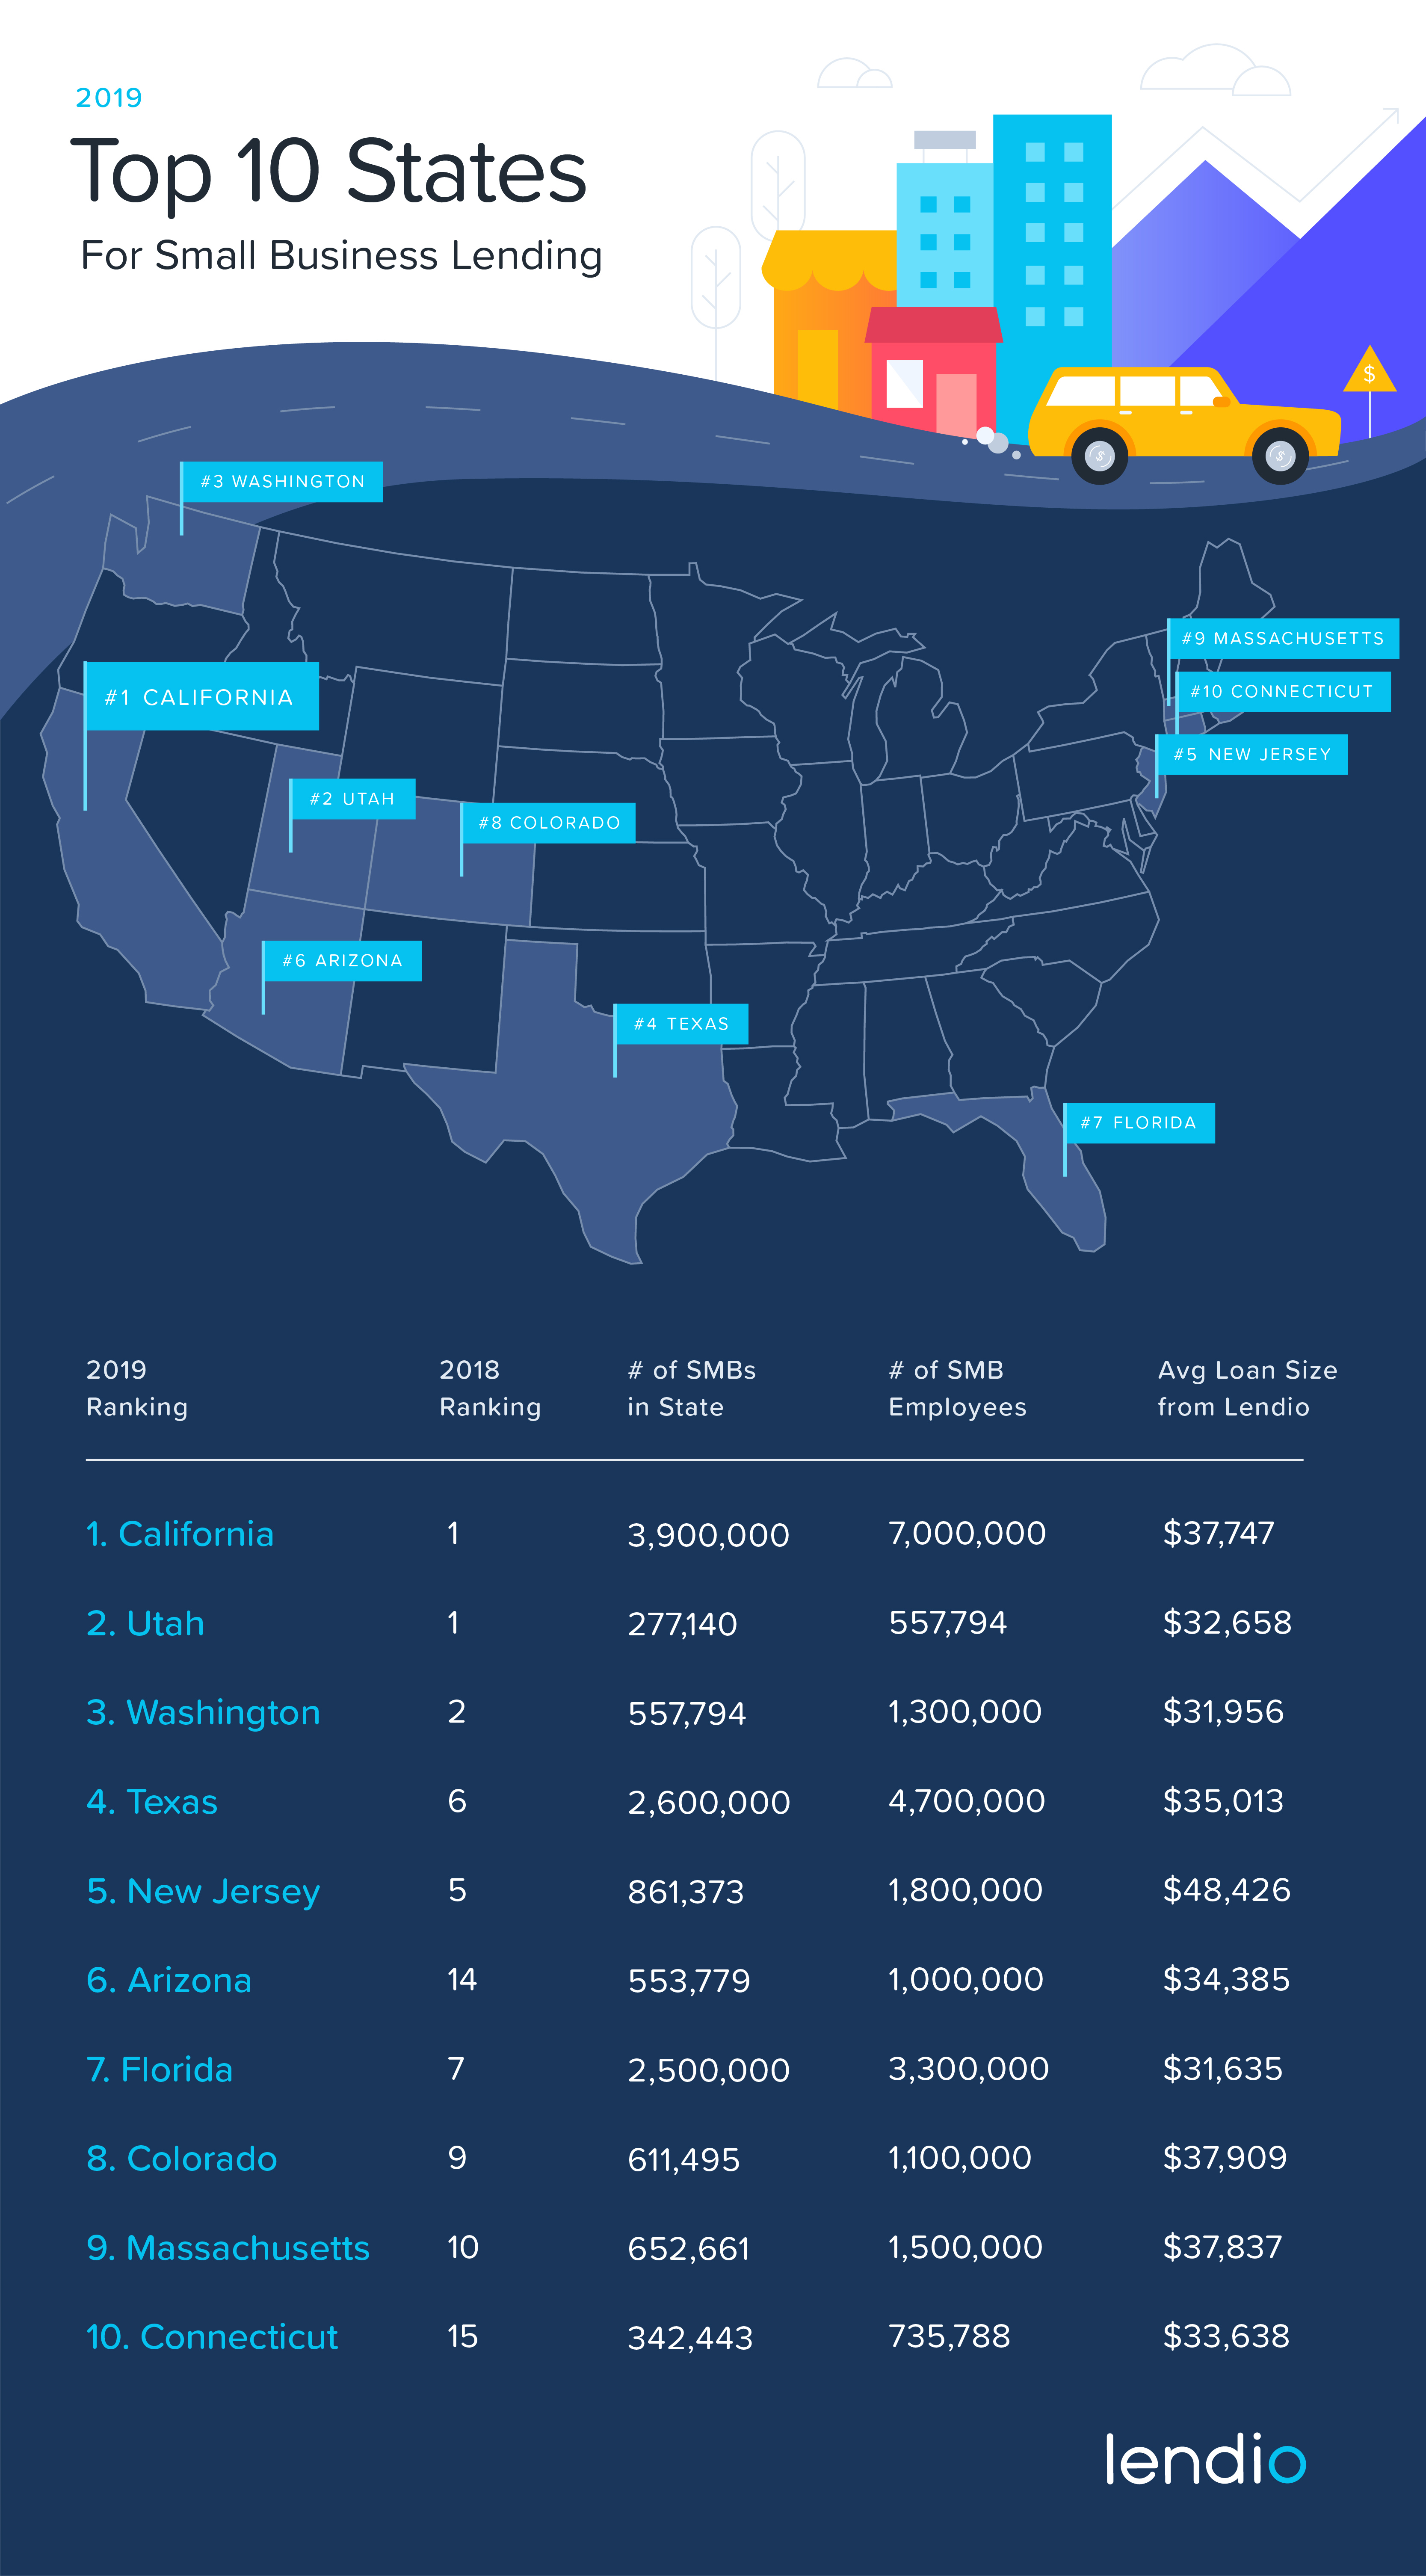 2019 Top 10 States for Small Business Lending